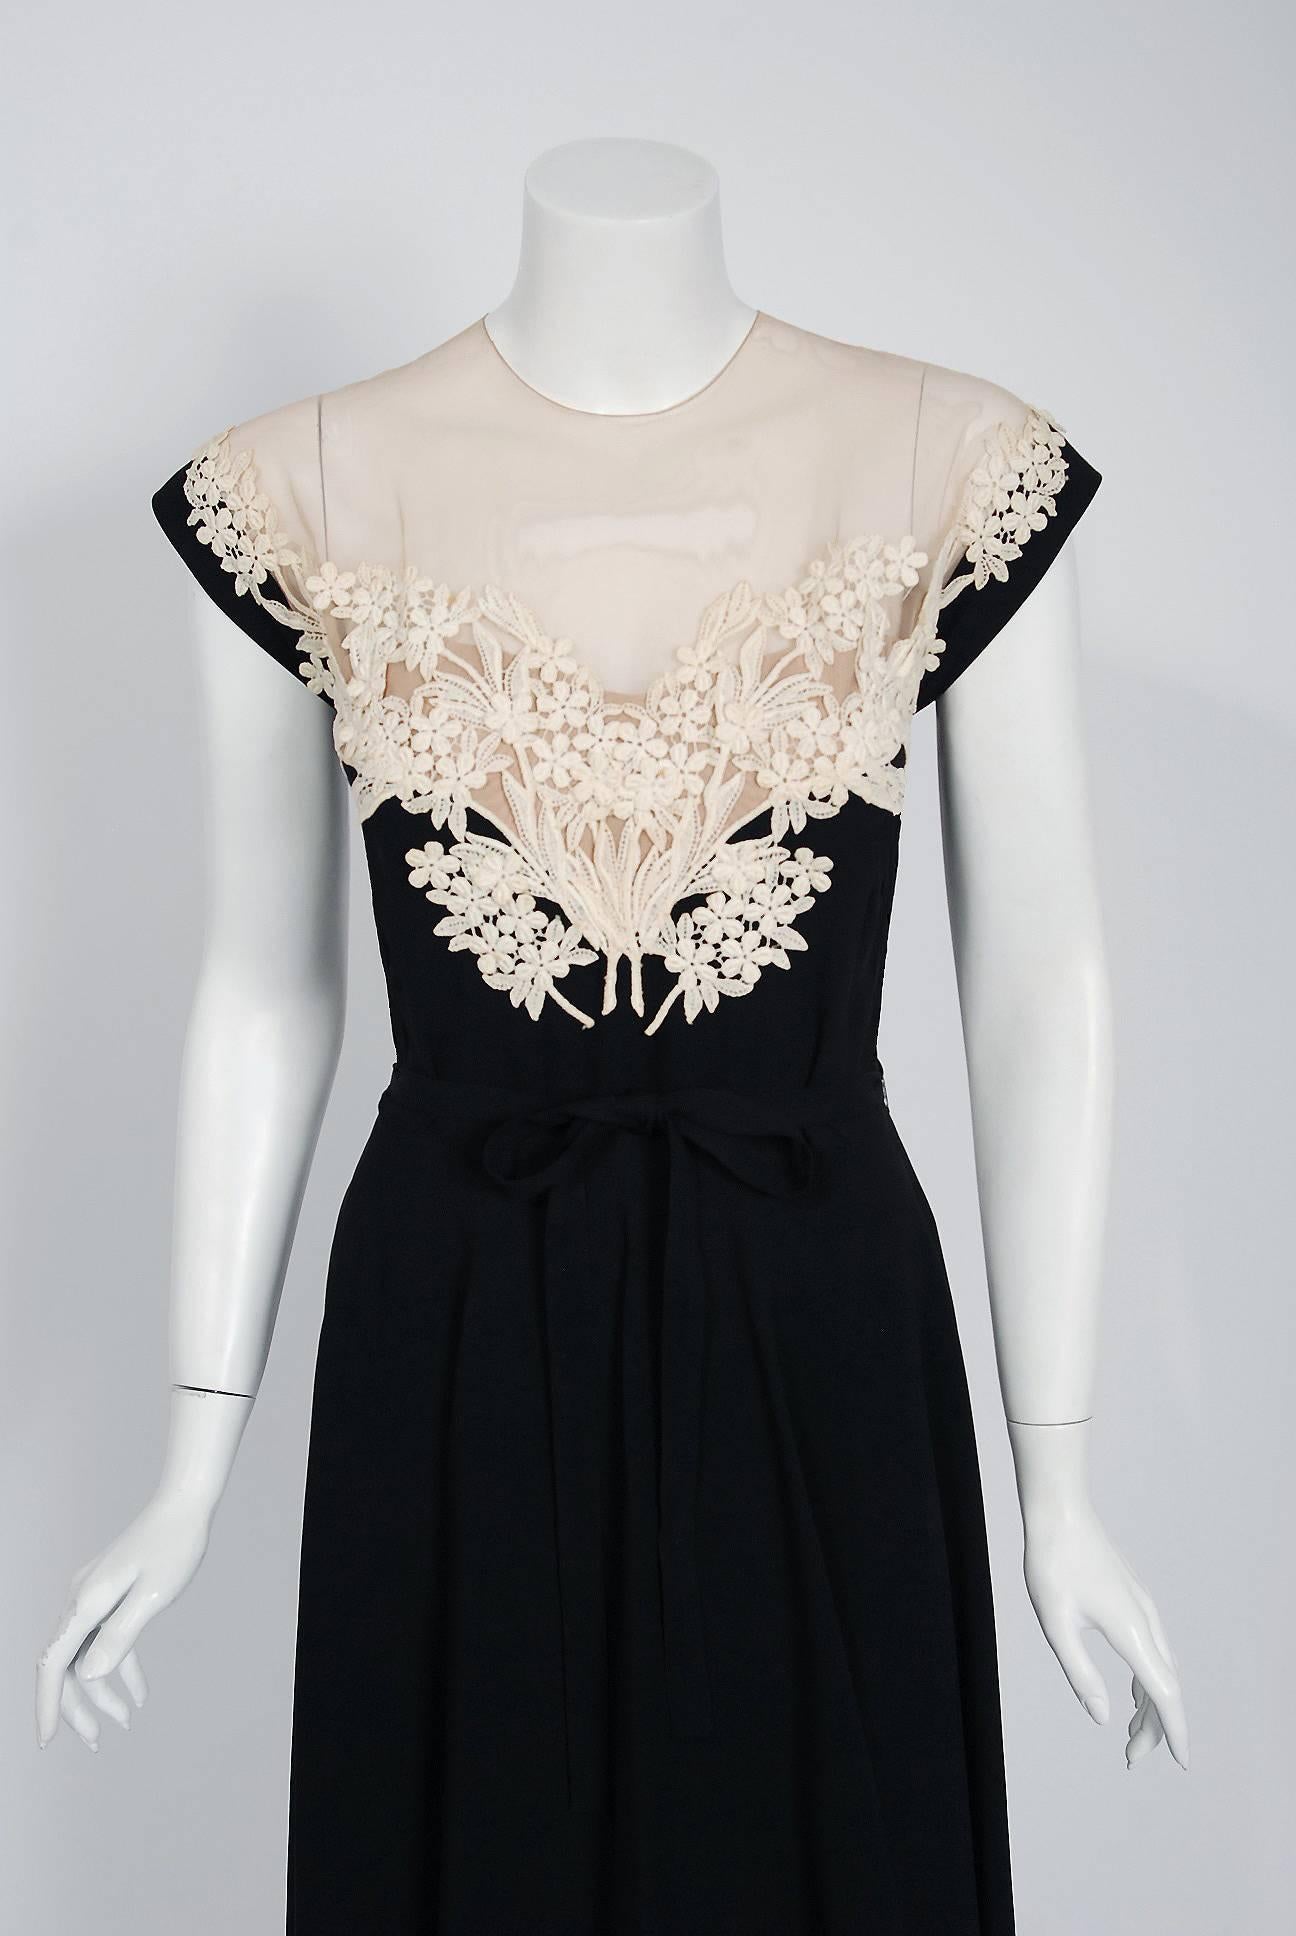 An amazing and highly stylized 1940's silk rayon swing dress by the famous American designer Peggy Hunt. Starting in the 1930's through the early 1960's, she was immensely successful with her specialized cocktail and evening dresses. Her garments